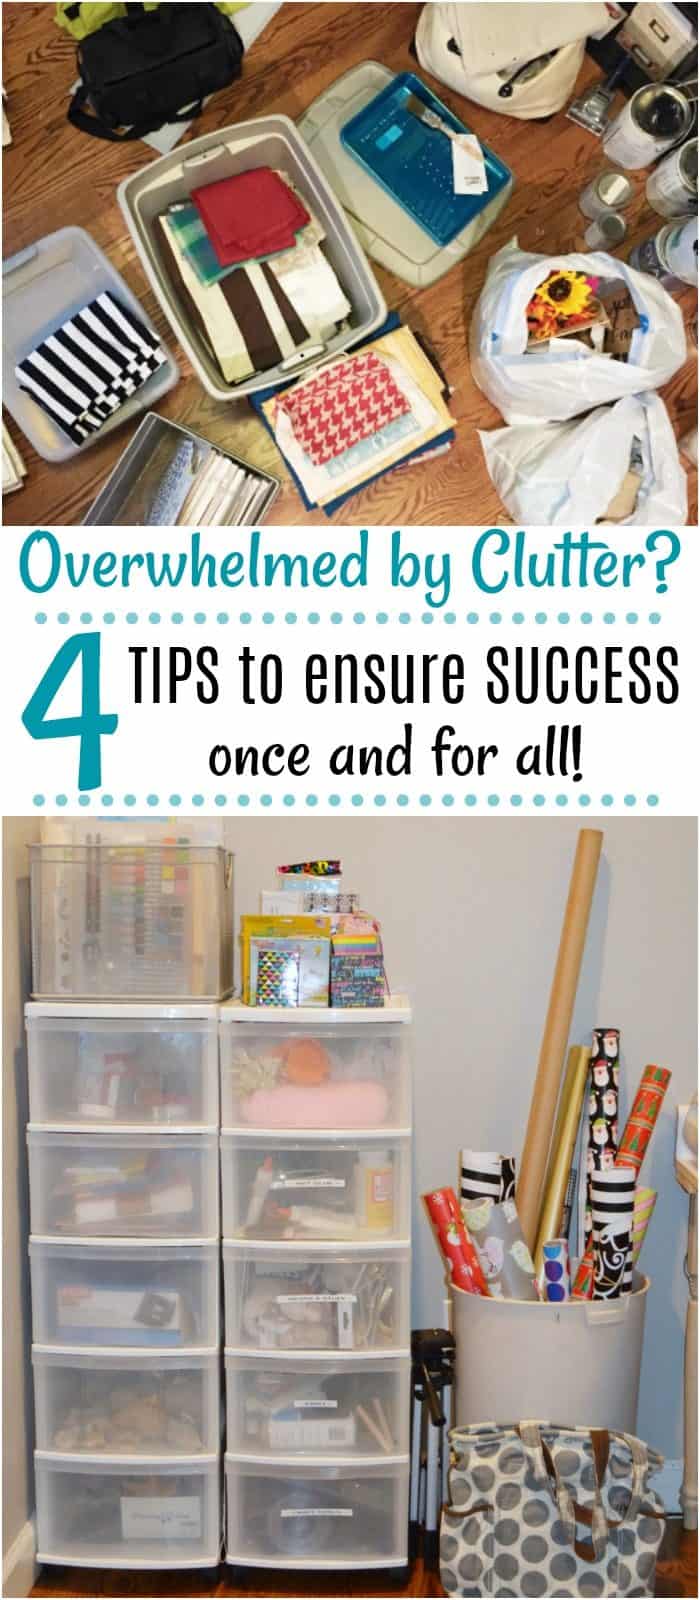 Overwhelmed by Clutter? $ Tips to ensure success once and for all! #clutter #organizedhome #organization